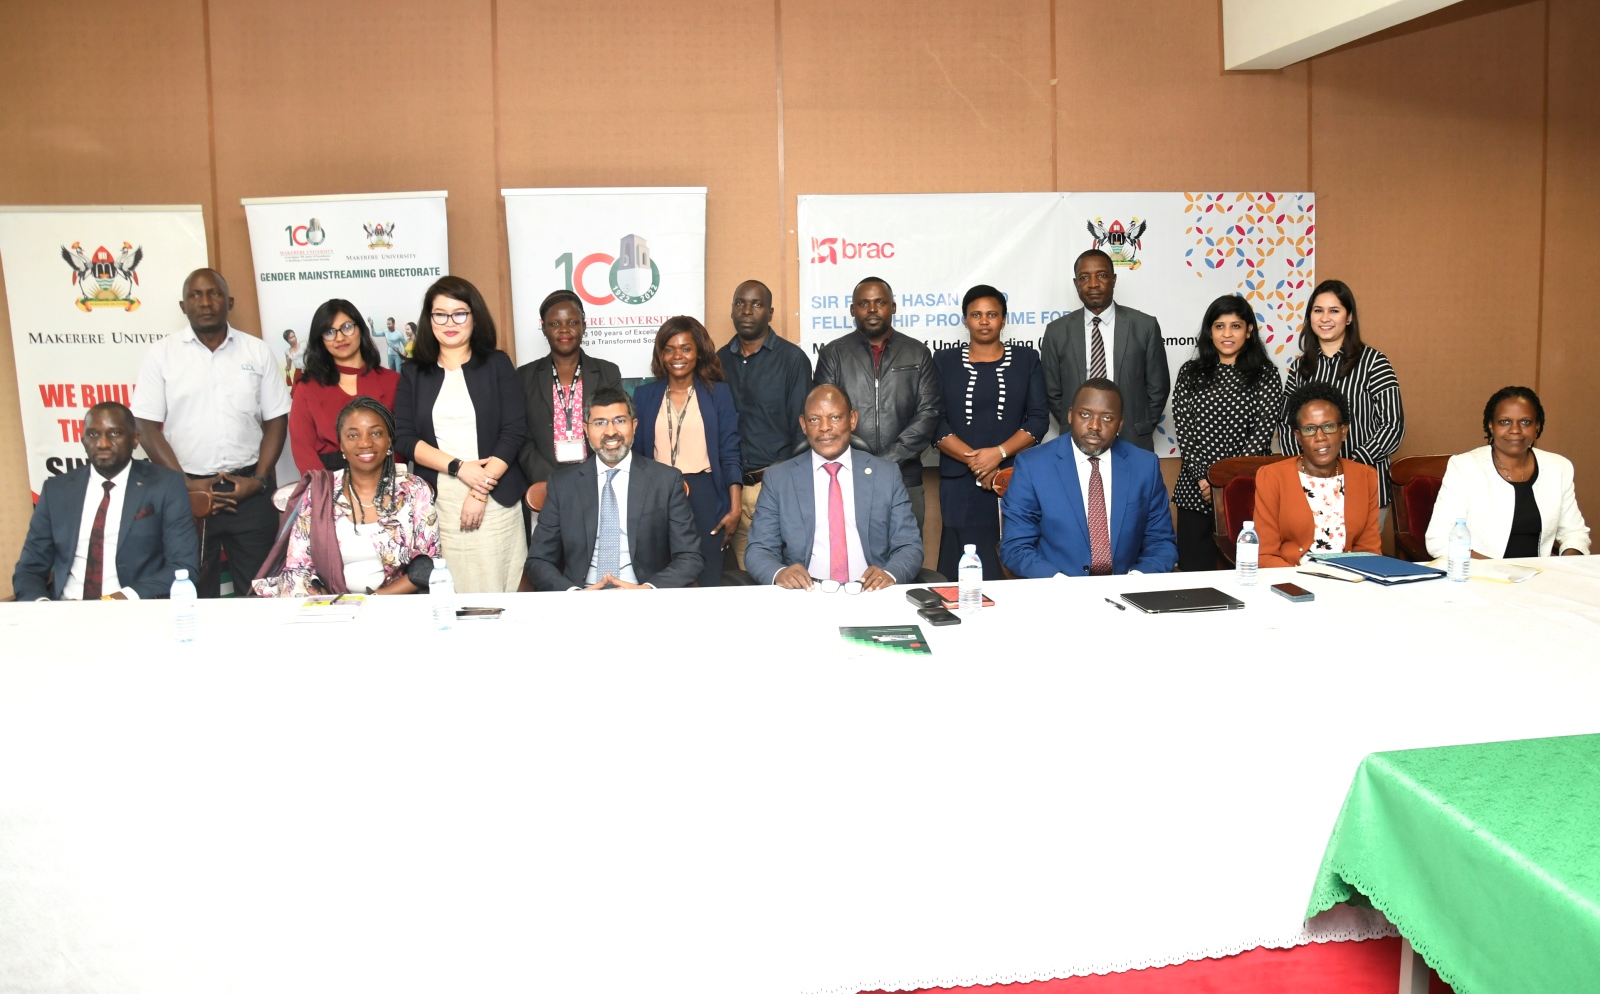 Seated: The Vice Chancellor-Prof. Barnabas Nawangwe (C), ED BRAC International-Mr. Shameran Abed (3rd L) and University Secretary-Mr. Yusuf Kiranda (3rd R) with R-L: BRAC Uganda Country Director-Ms. Spera Atuhairwe, Ag. Director GMD-Ms. Susan Mbabazi, BRAC Regional Director Africa-Ms. Rudo Kayombo and Deputy University Secretary-Mr. Simon Kizito with other officials (Standing) after the MoU Signing on 29th March 2023, Council Room, Makerere University.